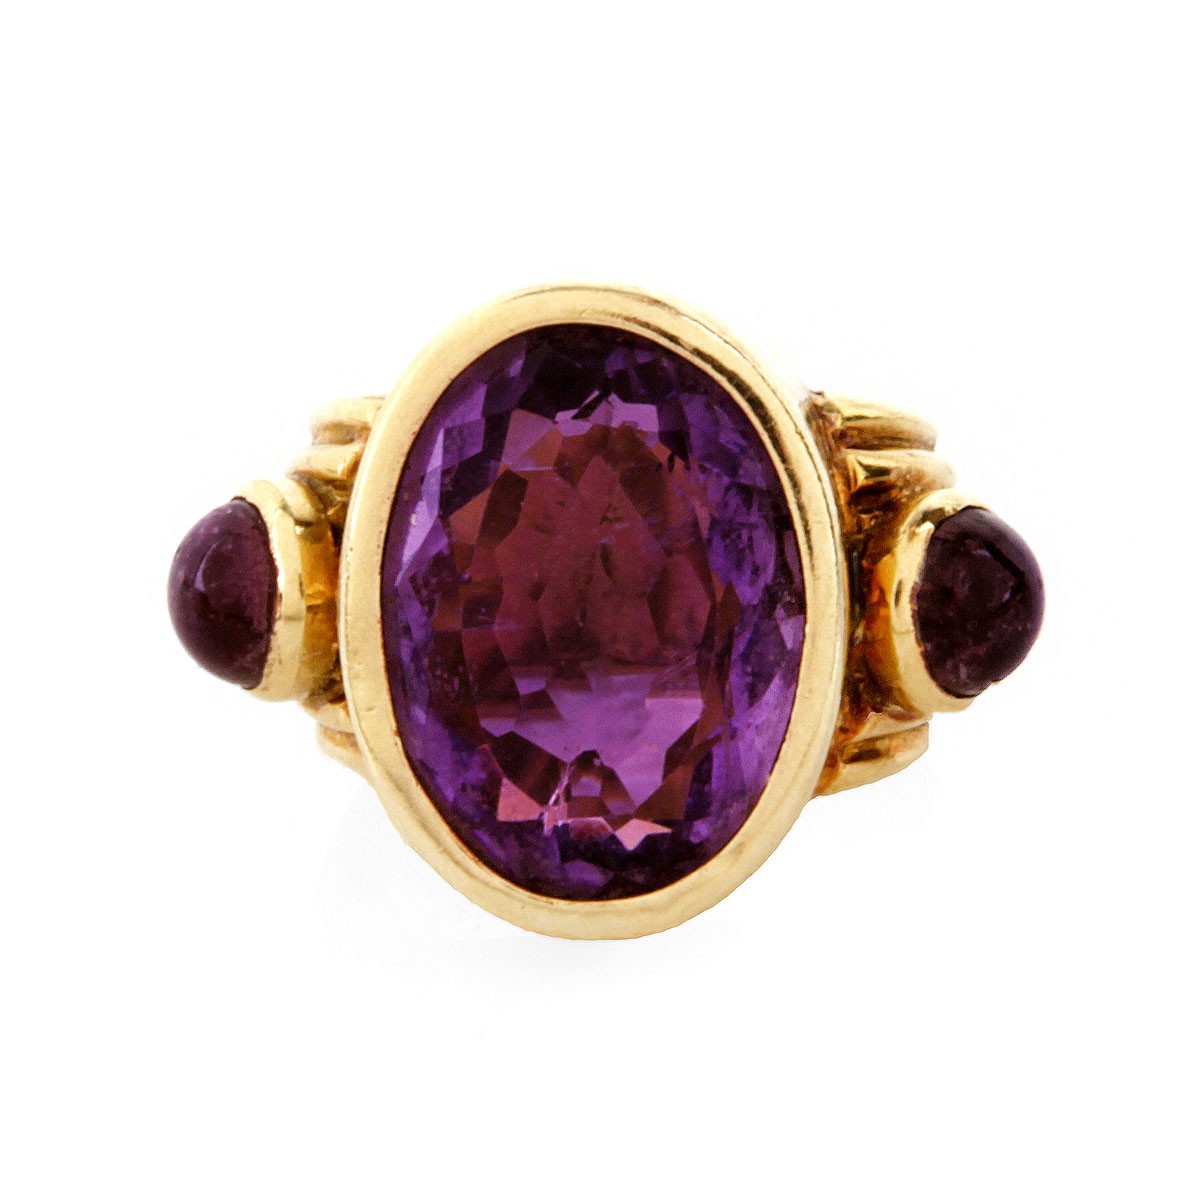 Vintage Amethyst and 18K Ring - Image 2 of 7